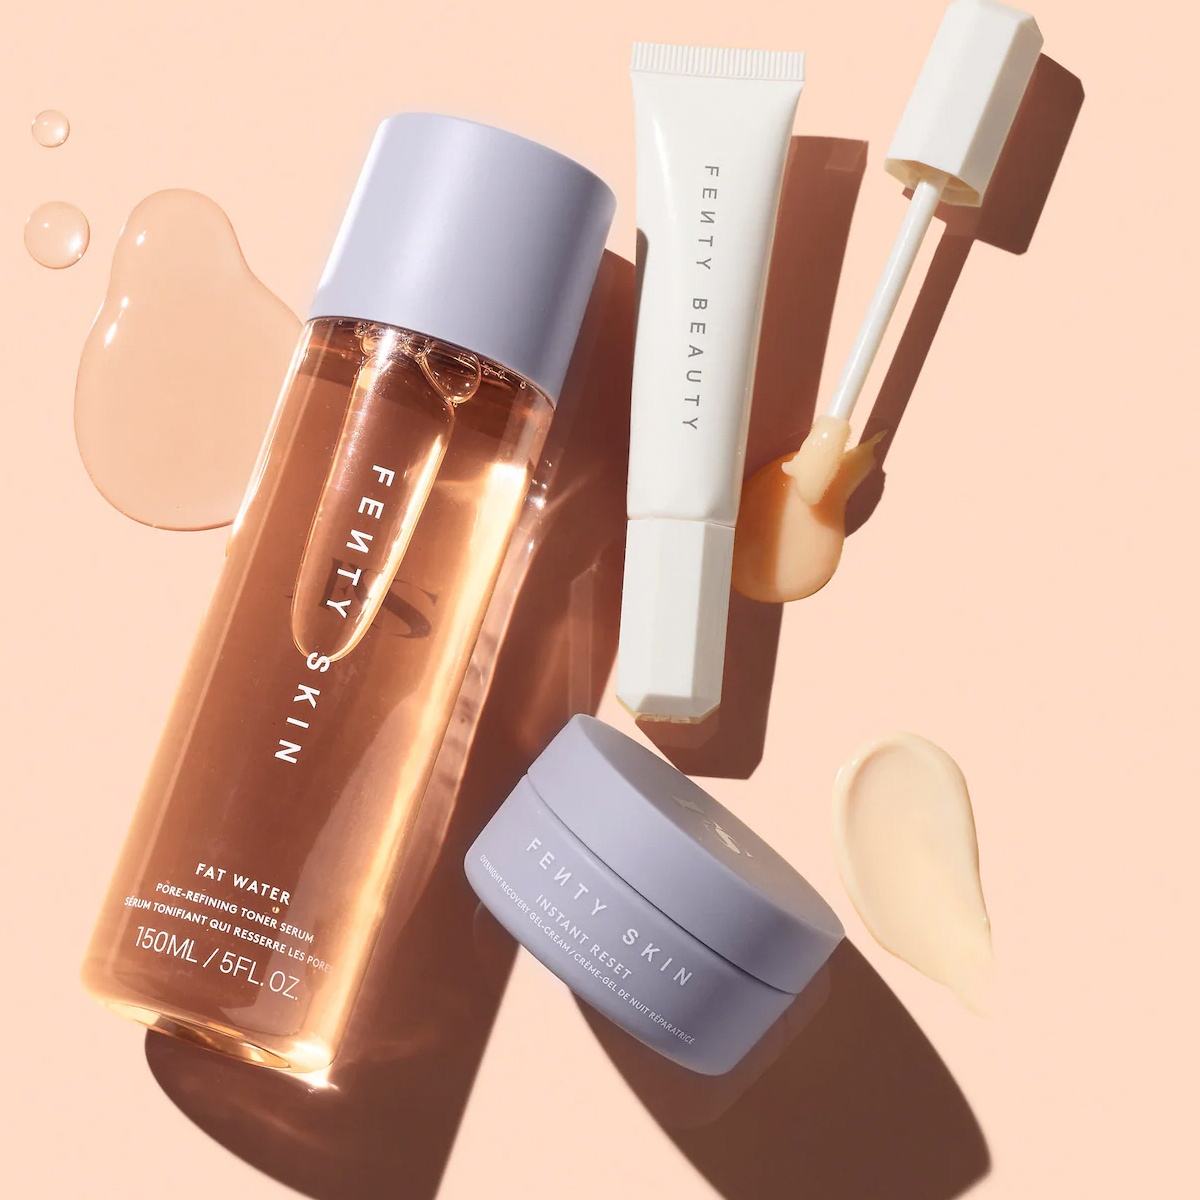 Rihanna Fenty Skin Care Review - Fenty Skin Products Launch Date, Prices,  Details